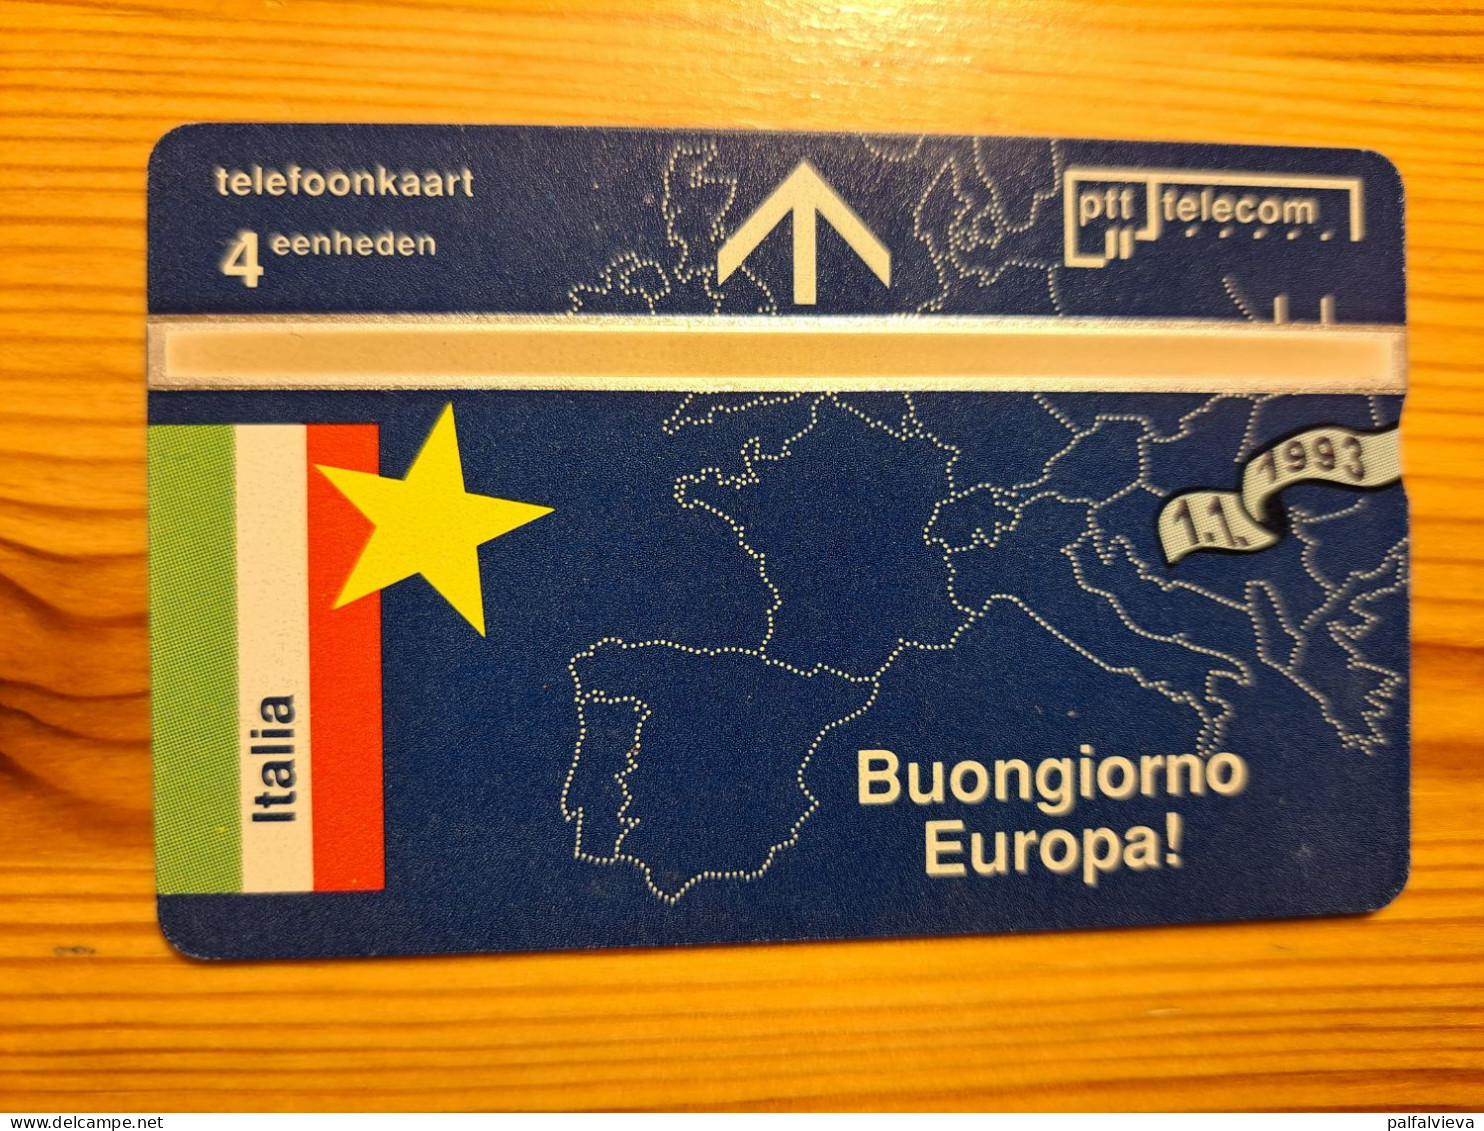 Phonecard Netherlands 008D - European Union, Italy - Privat